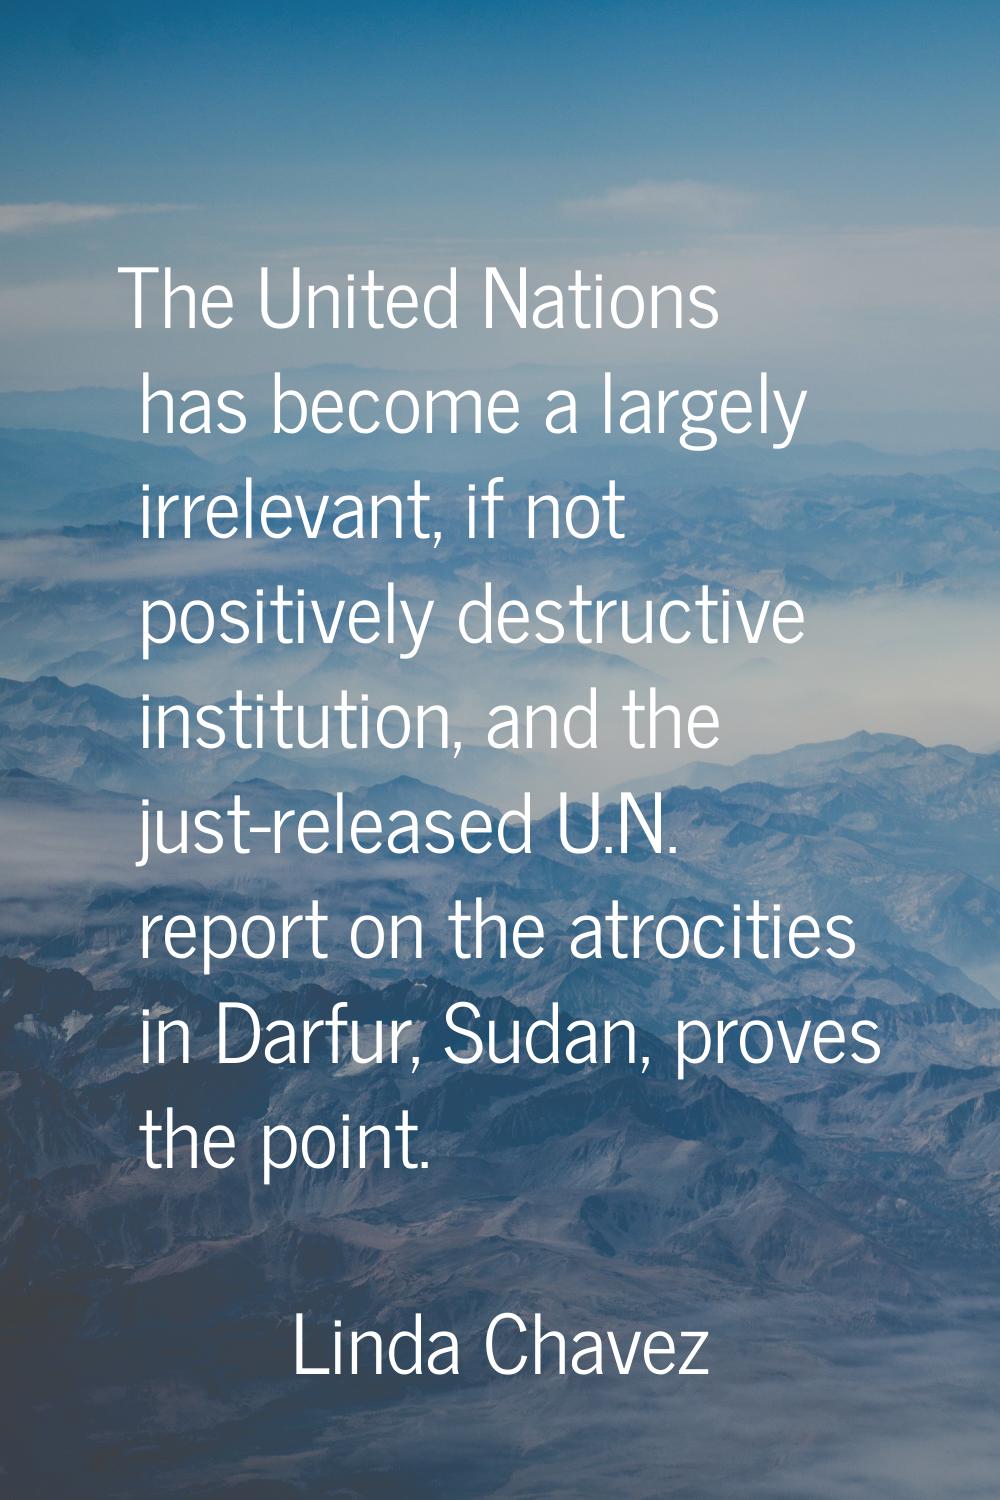 The United Nations has become a largely irrelevant, if not positively destructive institution, and 